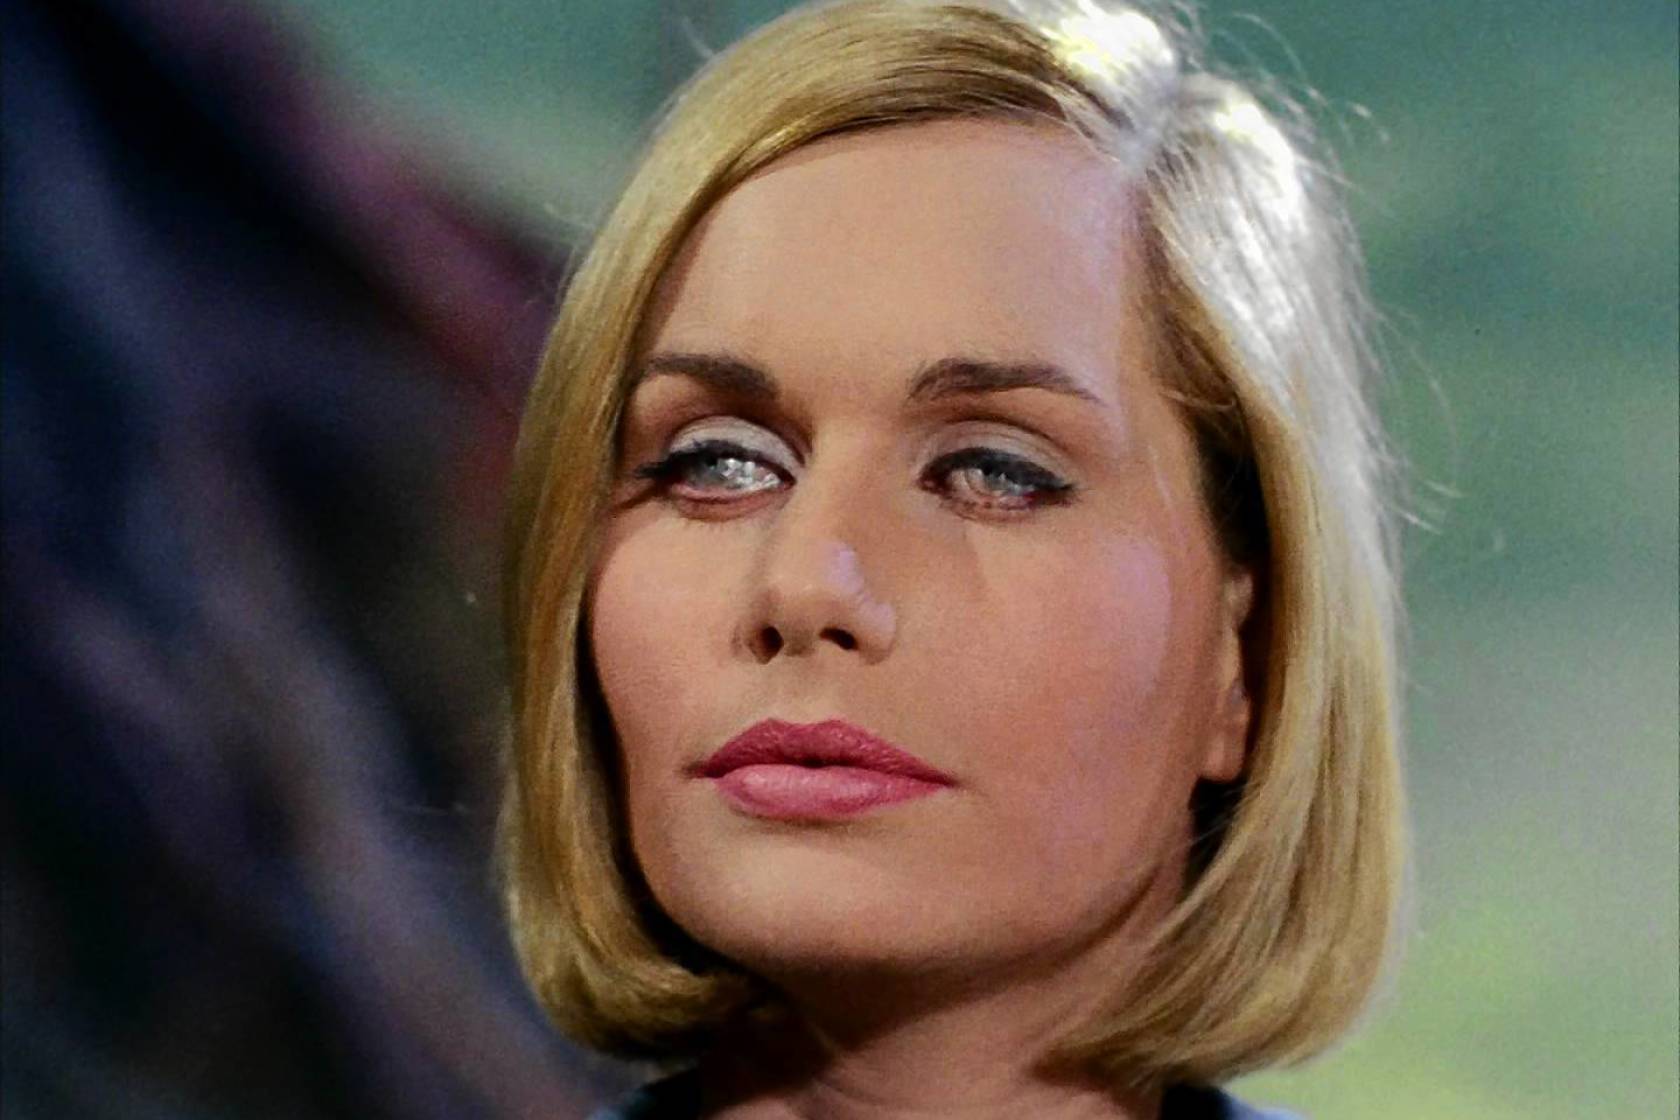 Sally Kellerman Height Feet Inches cm Weight Body Measurements